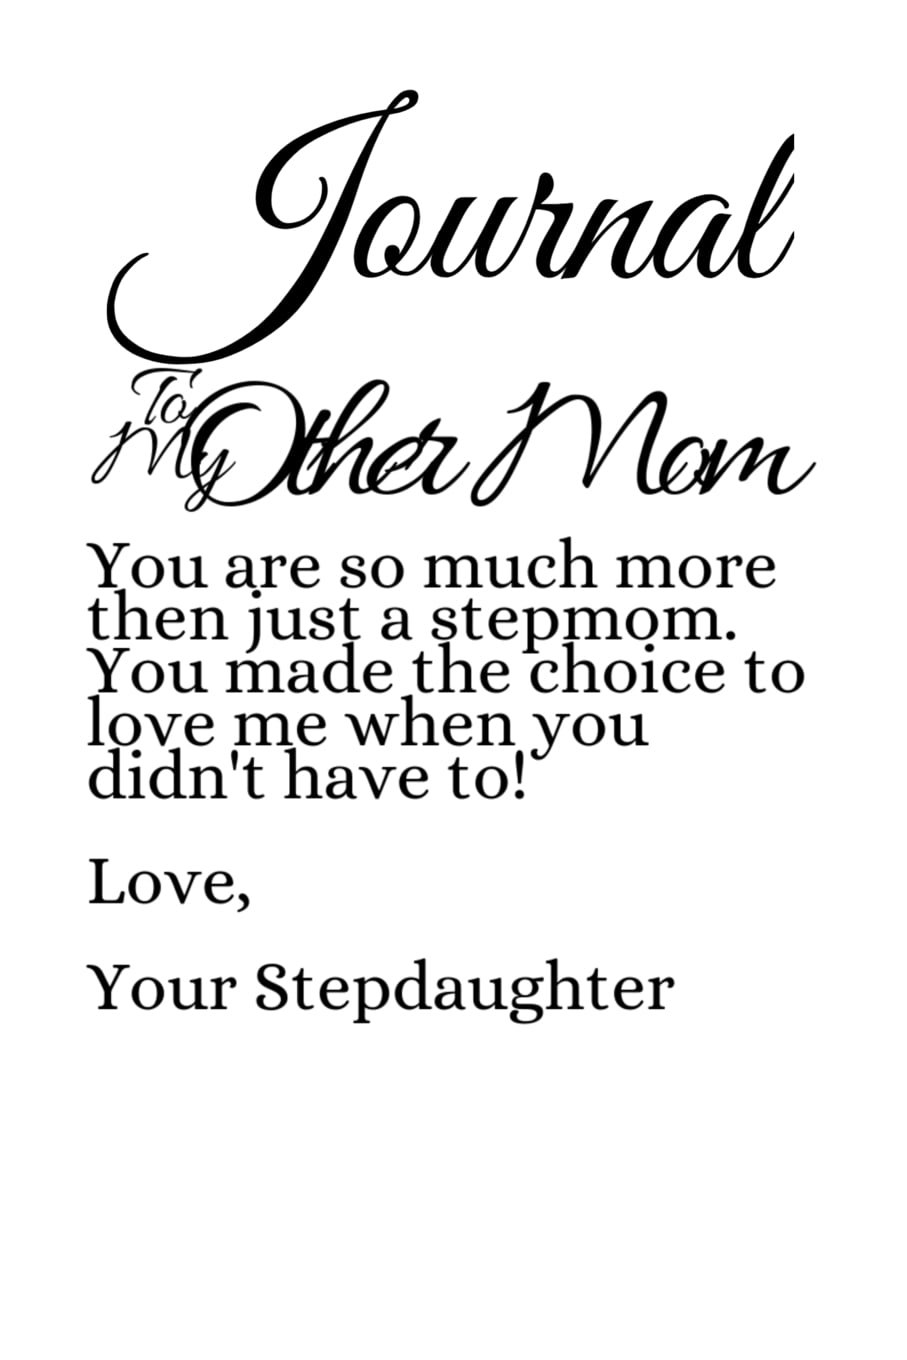 Best of Stepmom and daughter quotes